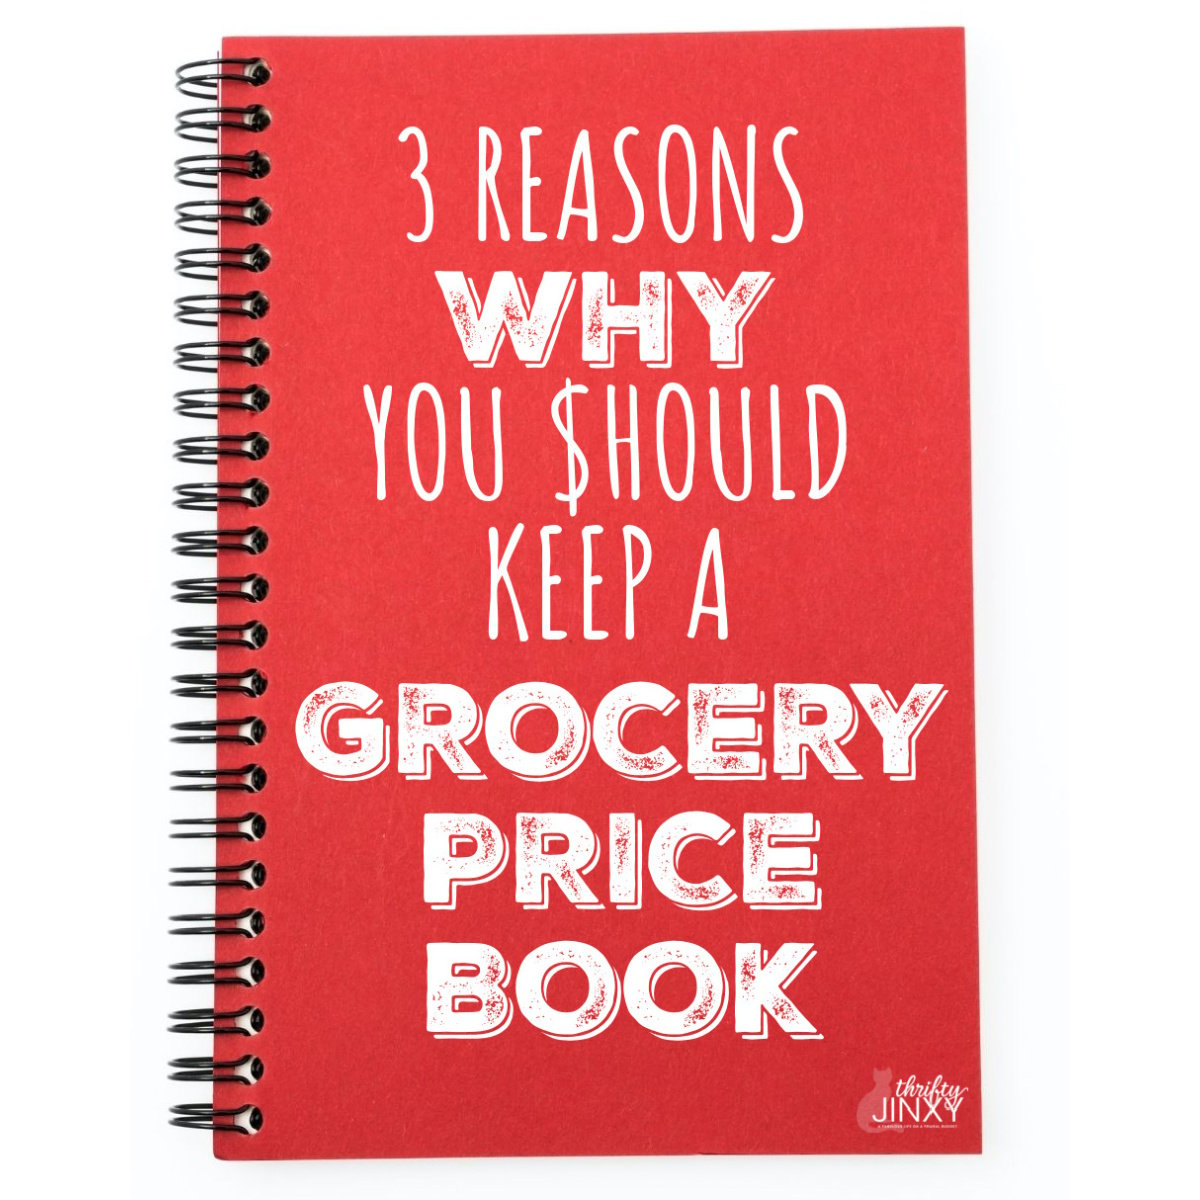 Why You Should Keep a Grocery Price Book Thrifty Jinxy